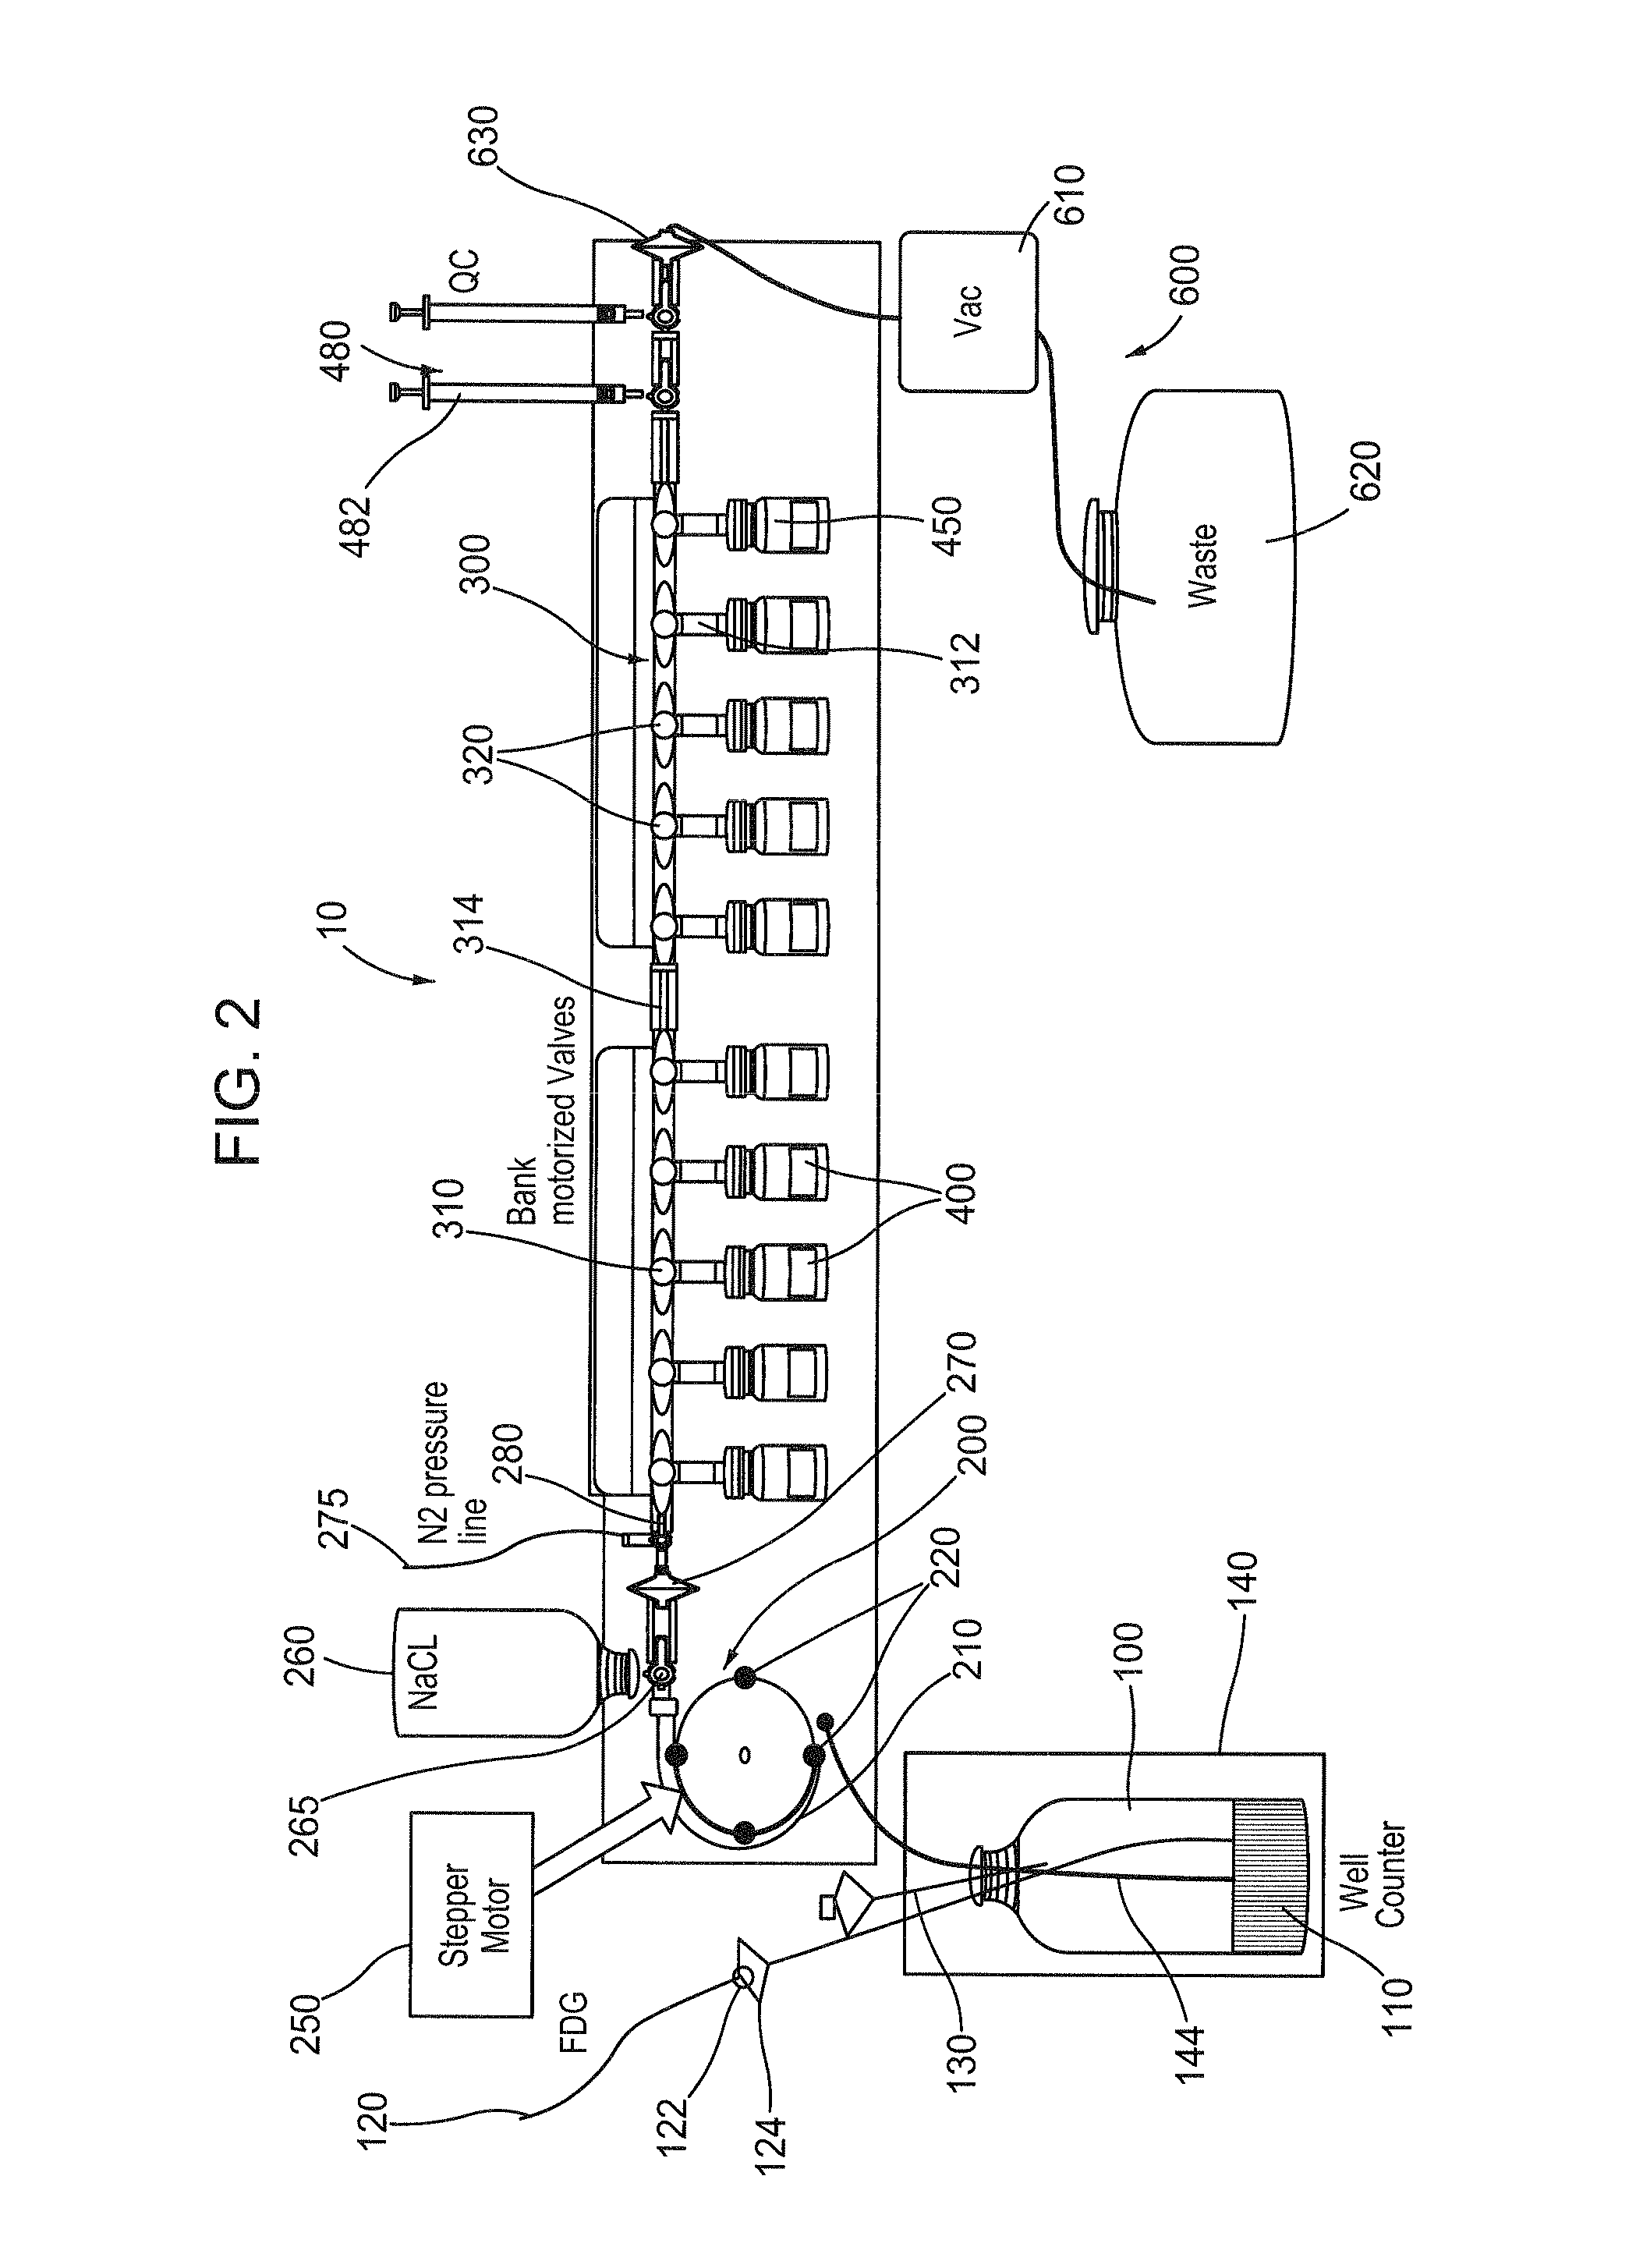 Closed vial fill system for aseptic dispensing